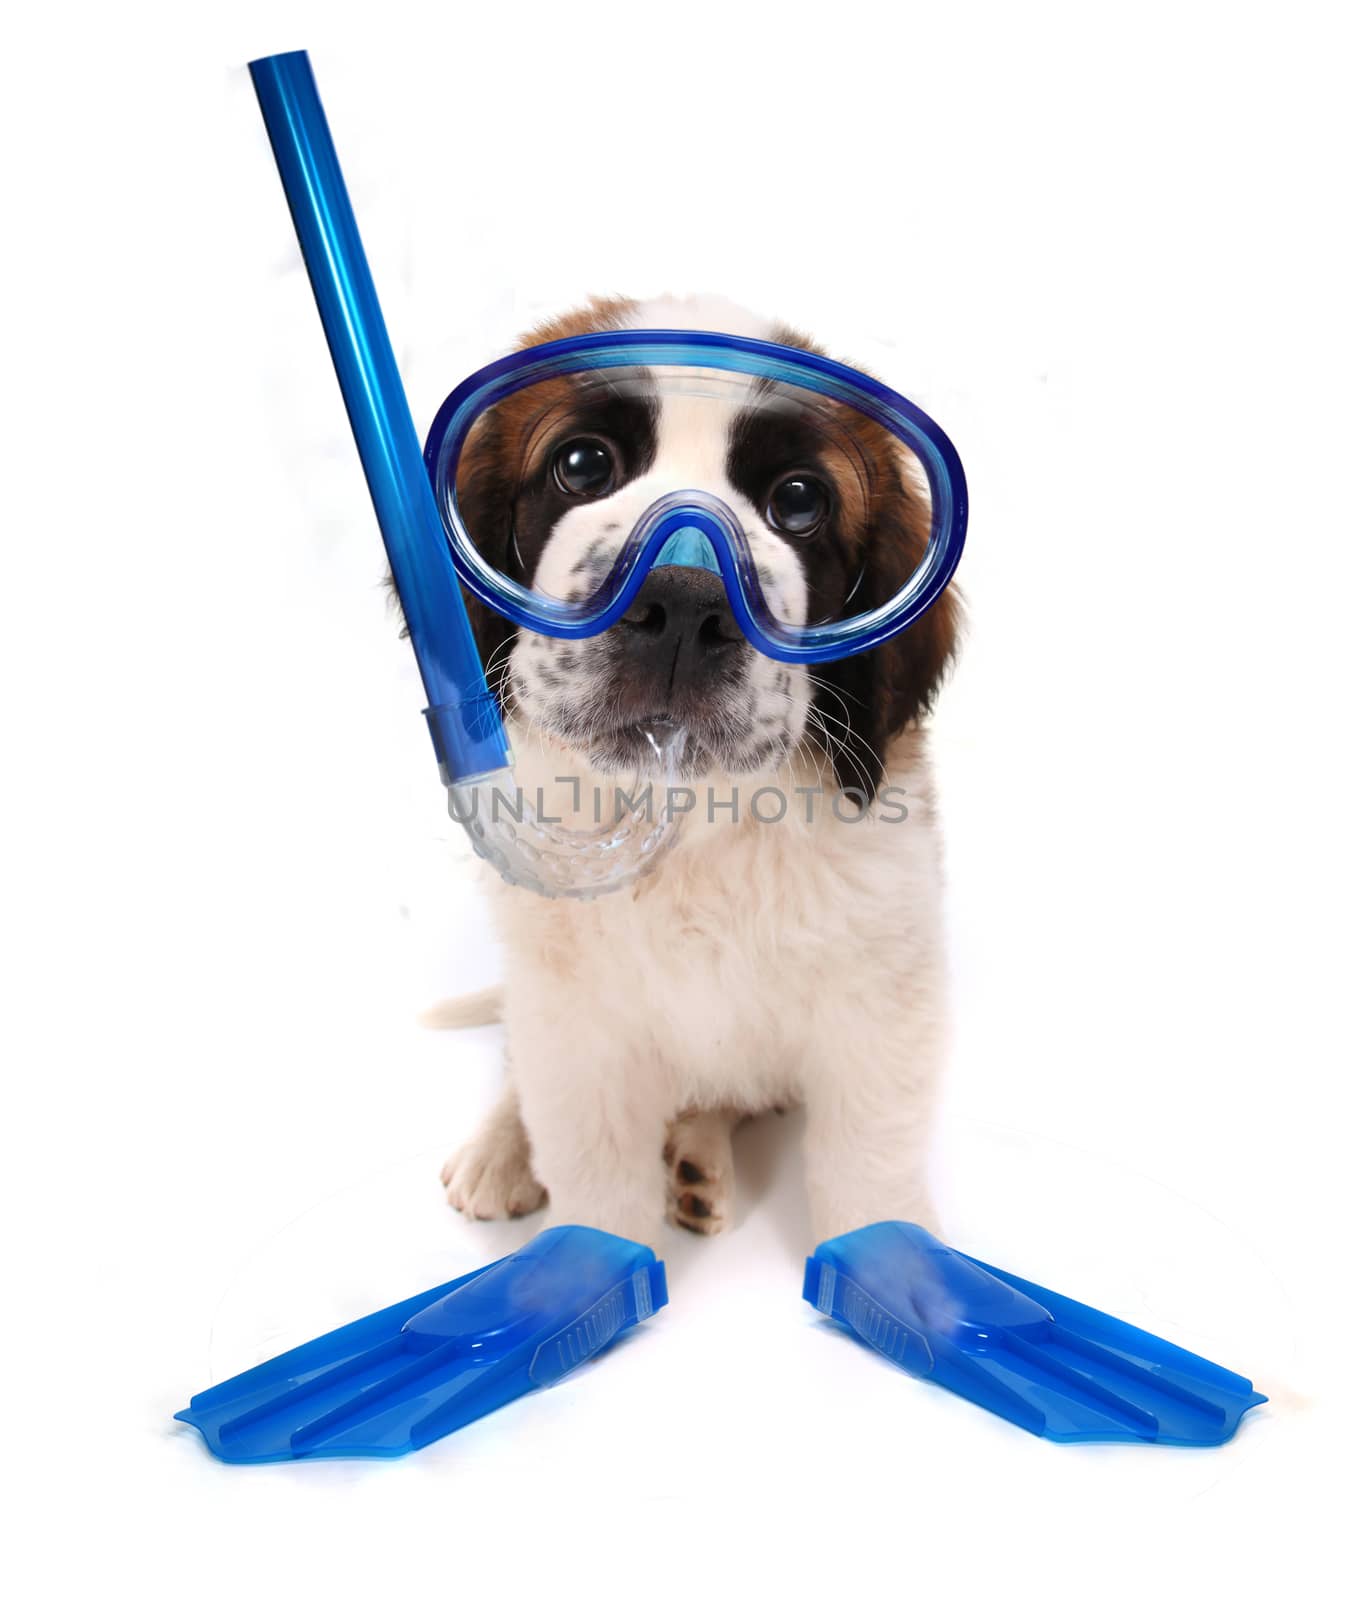 Funny Image of a Puppy Wearing Snorkeling Gear on White Background